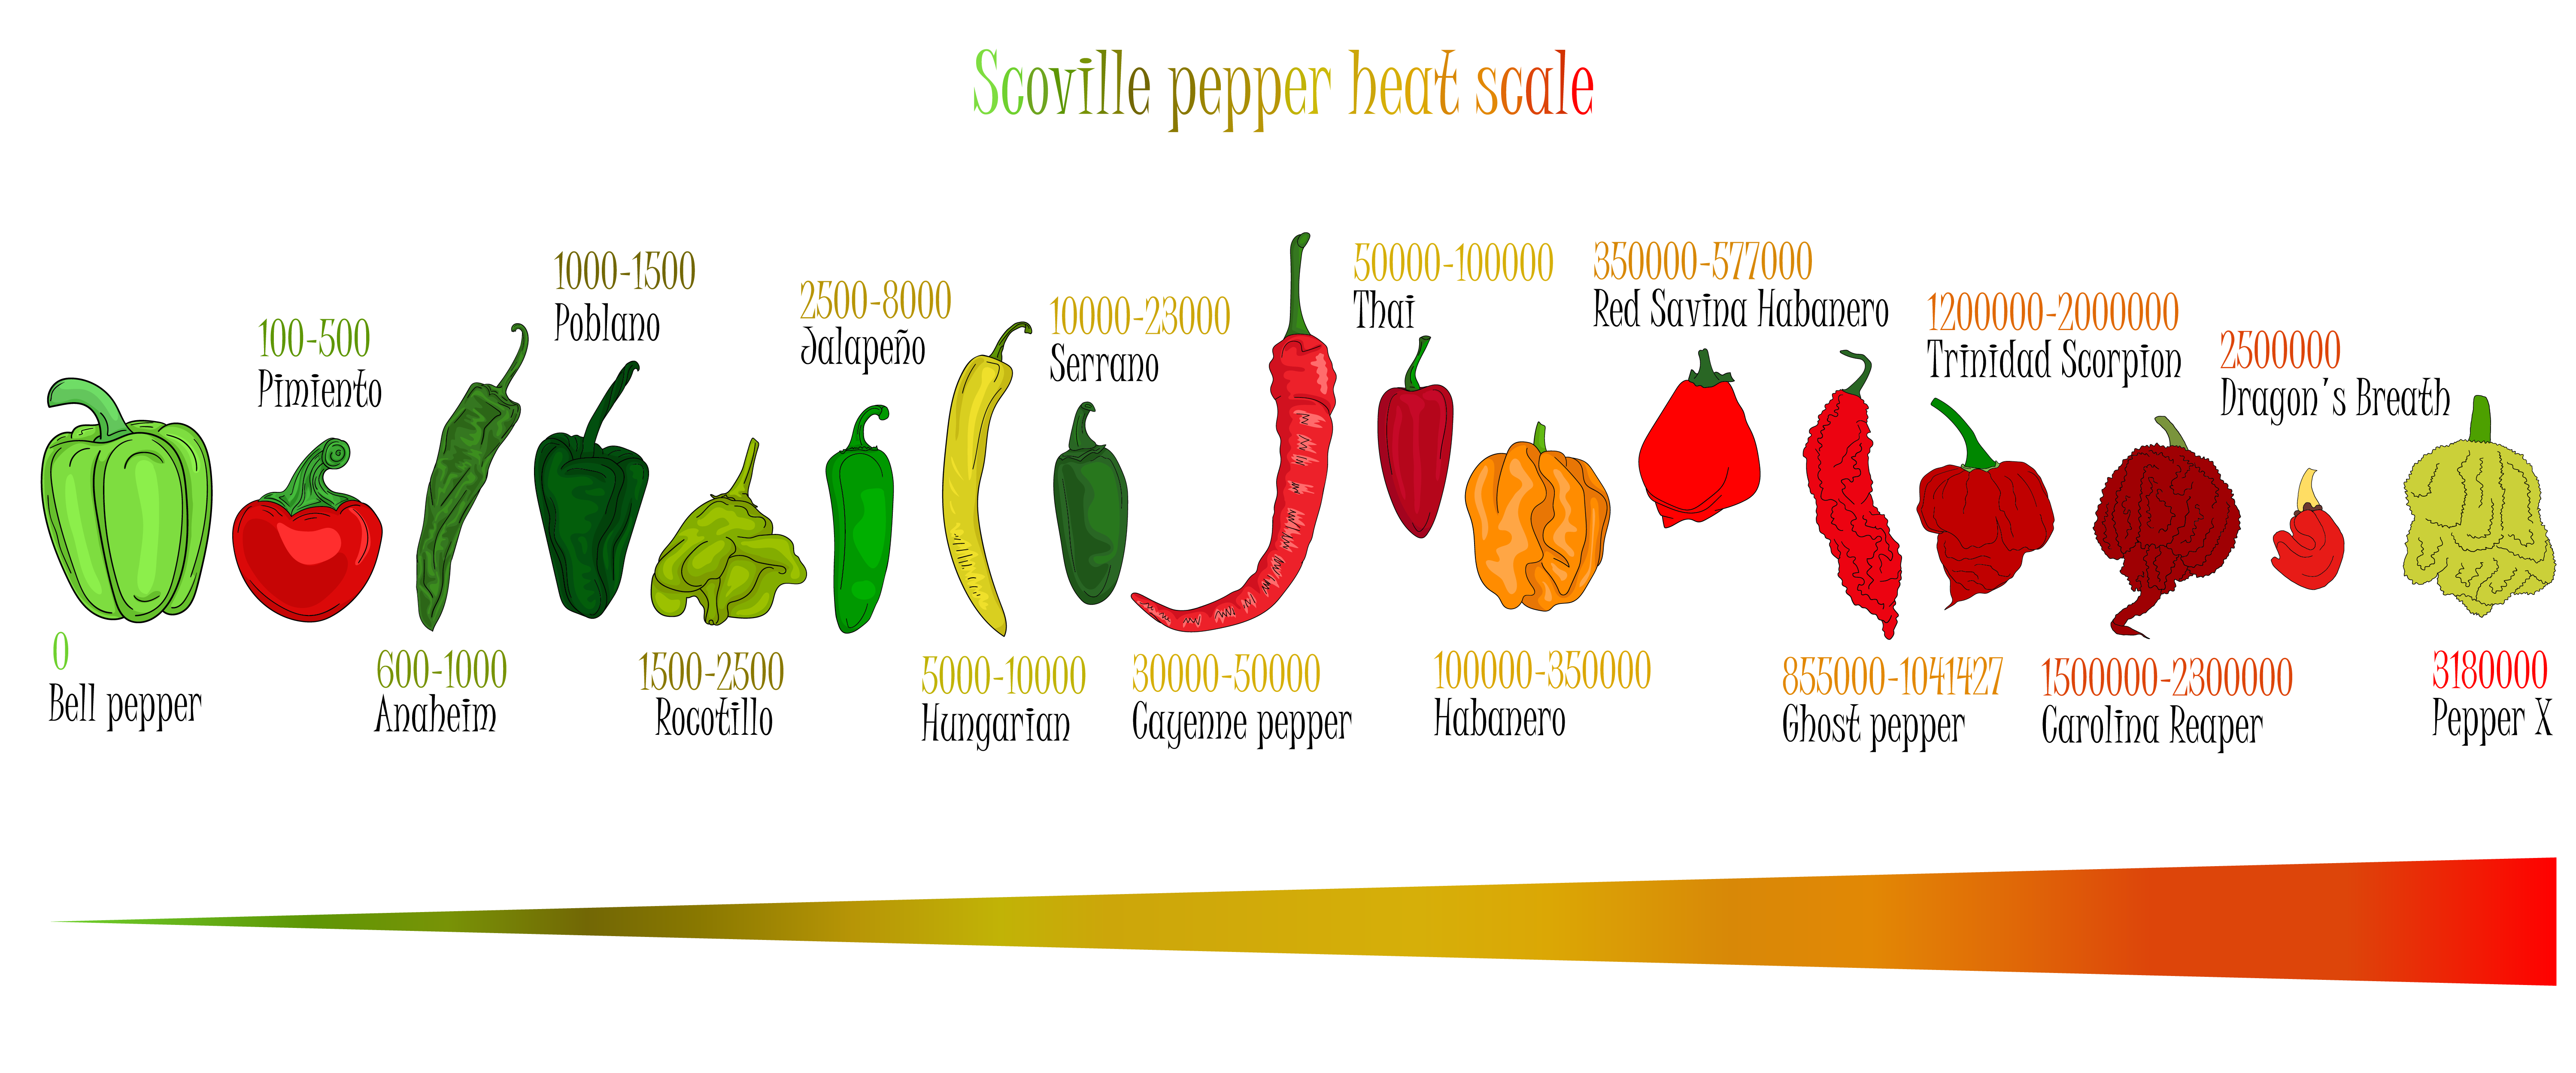 Series of drawings of different peppers showing their Scoville Scale range